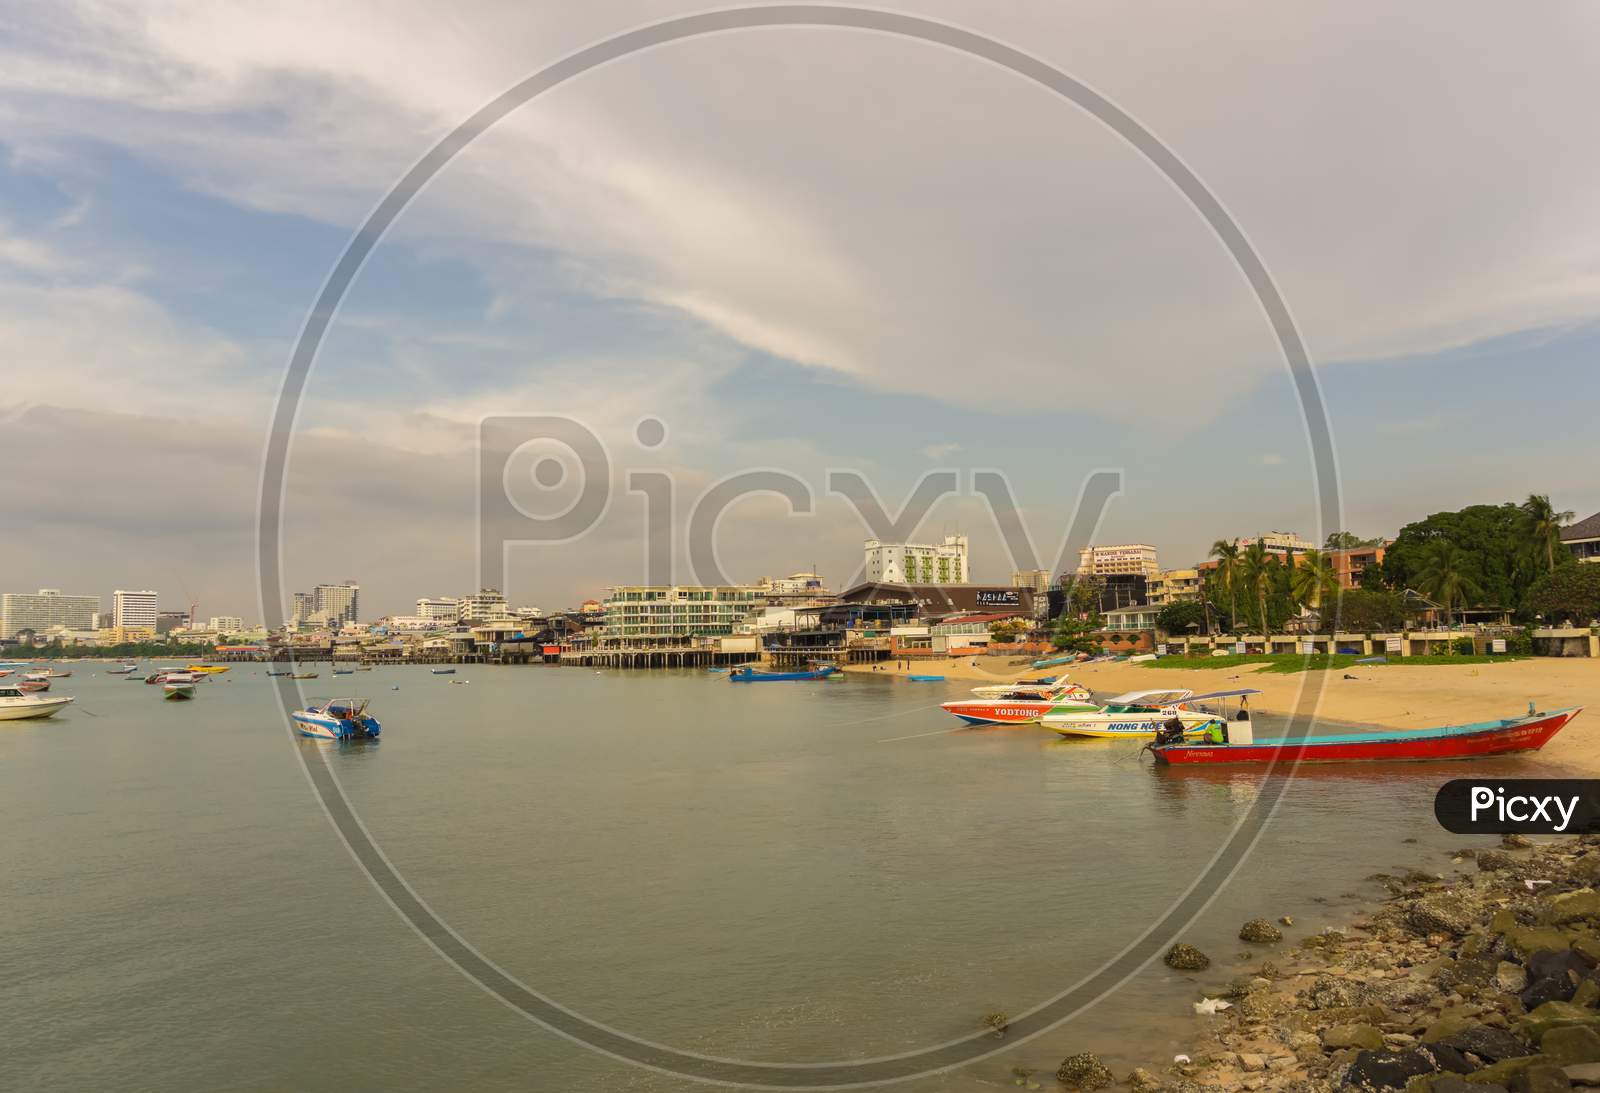 Pattaya,Thailand - April 20,2018: Bali Hai This Is The View From The Harbor Where Tourists Starting Trips To Koh Larn And Koh Sak By Boats And Ships,To The City.